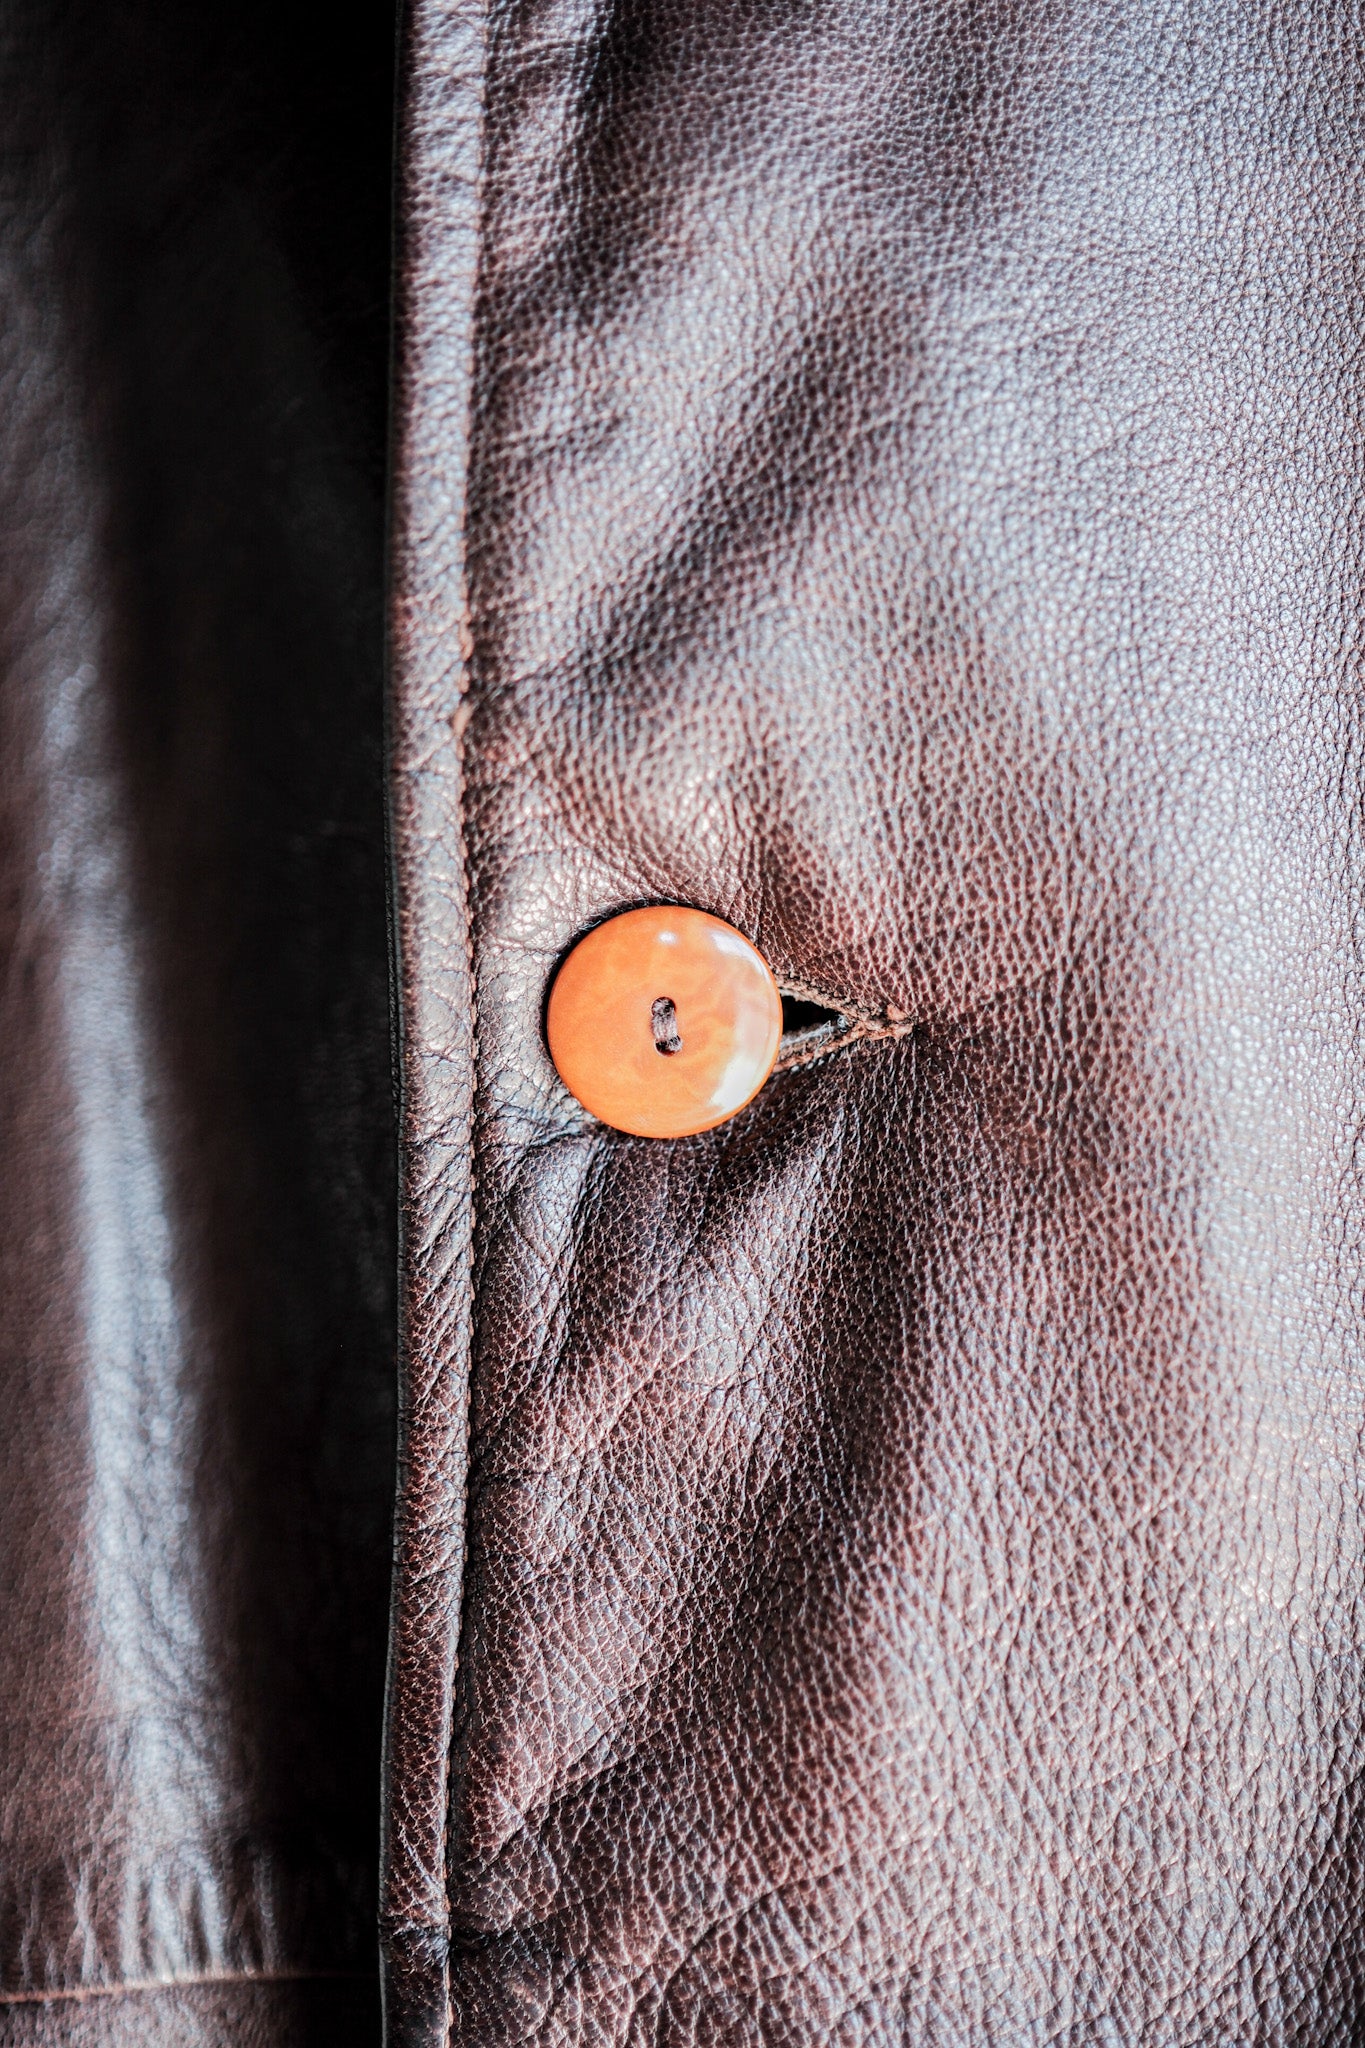 [~ 80's] Old C.P.Company Leather Jacket size.48